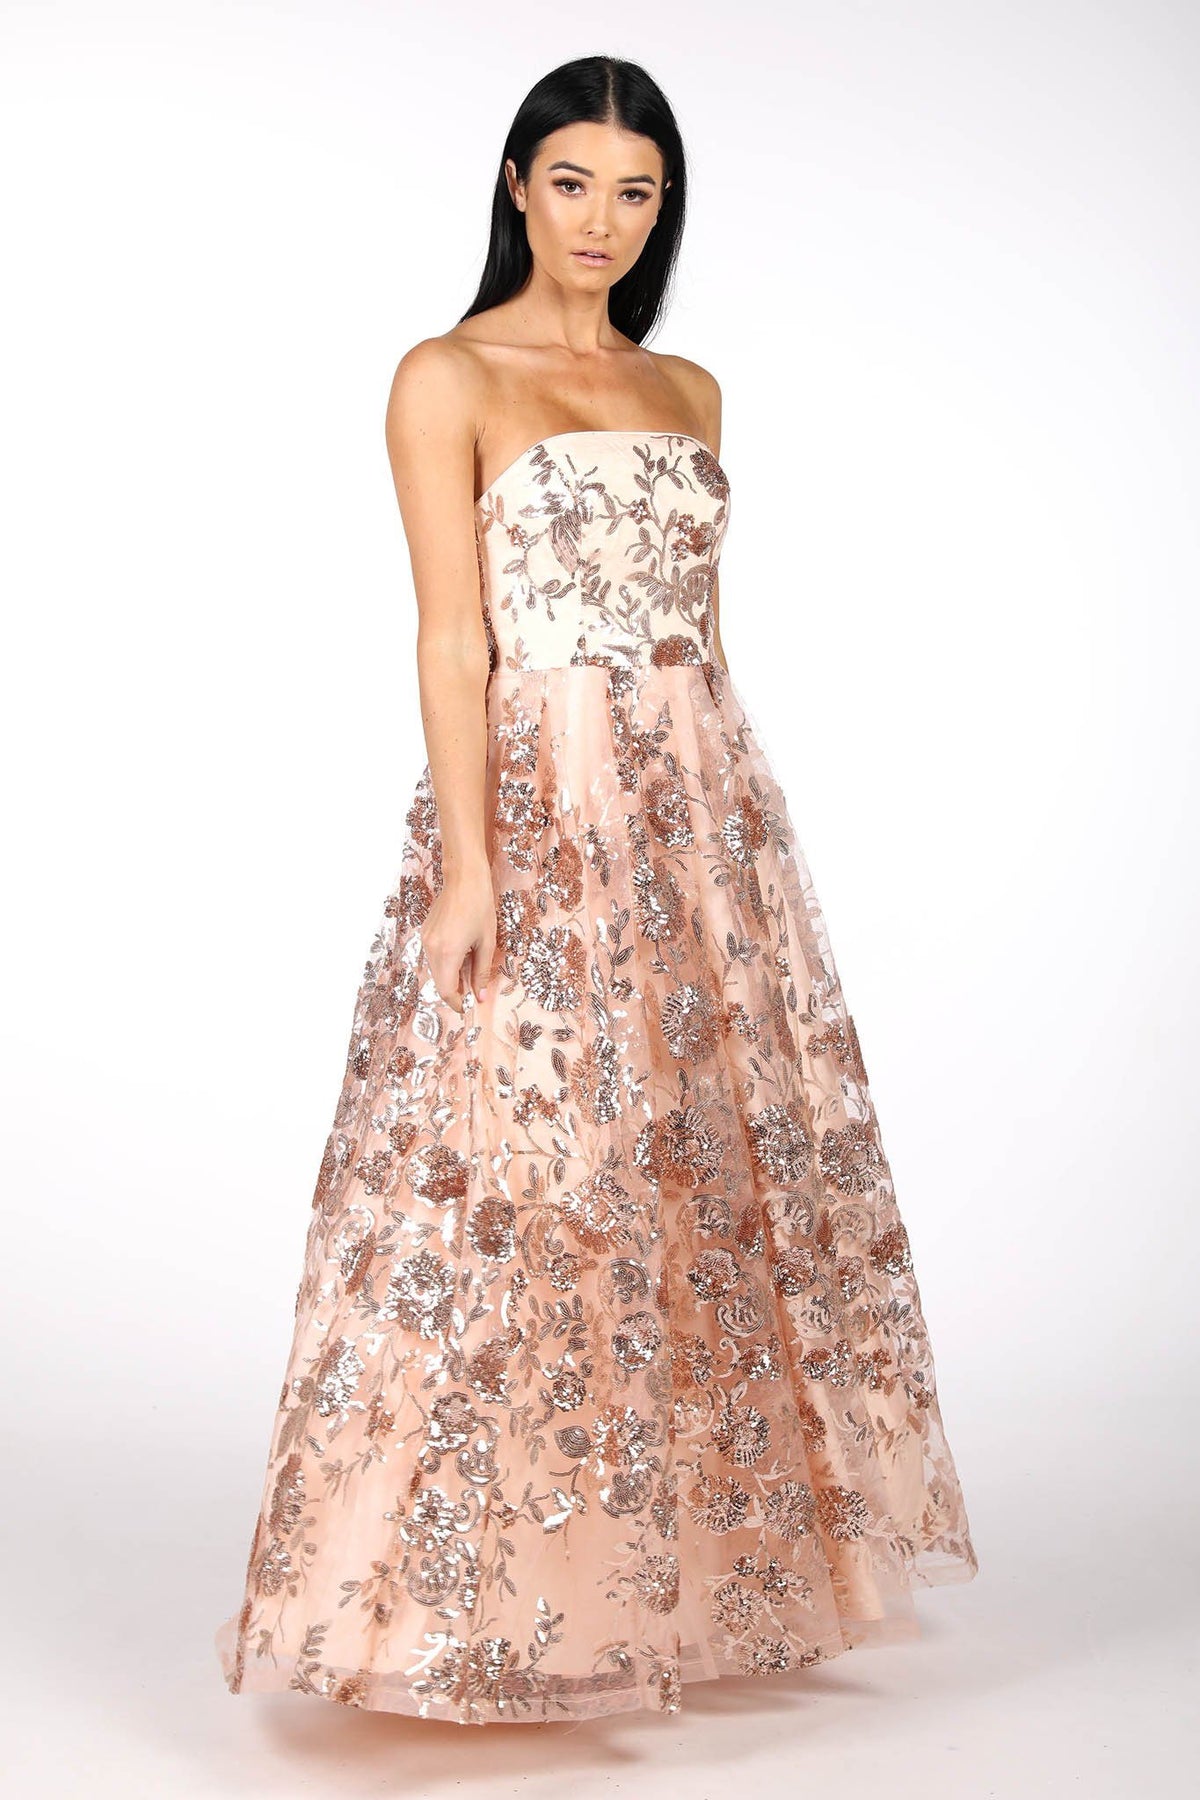 Strapless Square Neckline A Line Ball Gown with Embroidered Flower Sequinned Mesh in Rose Gold Colour